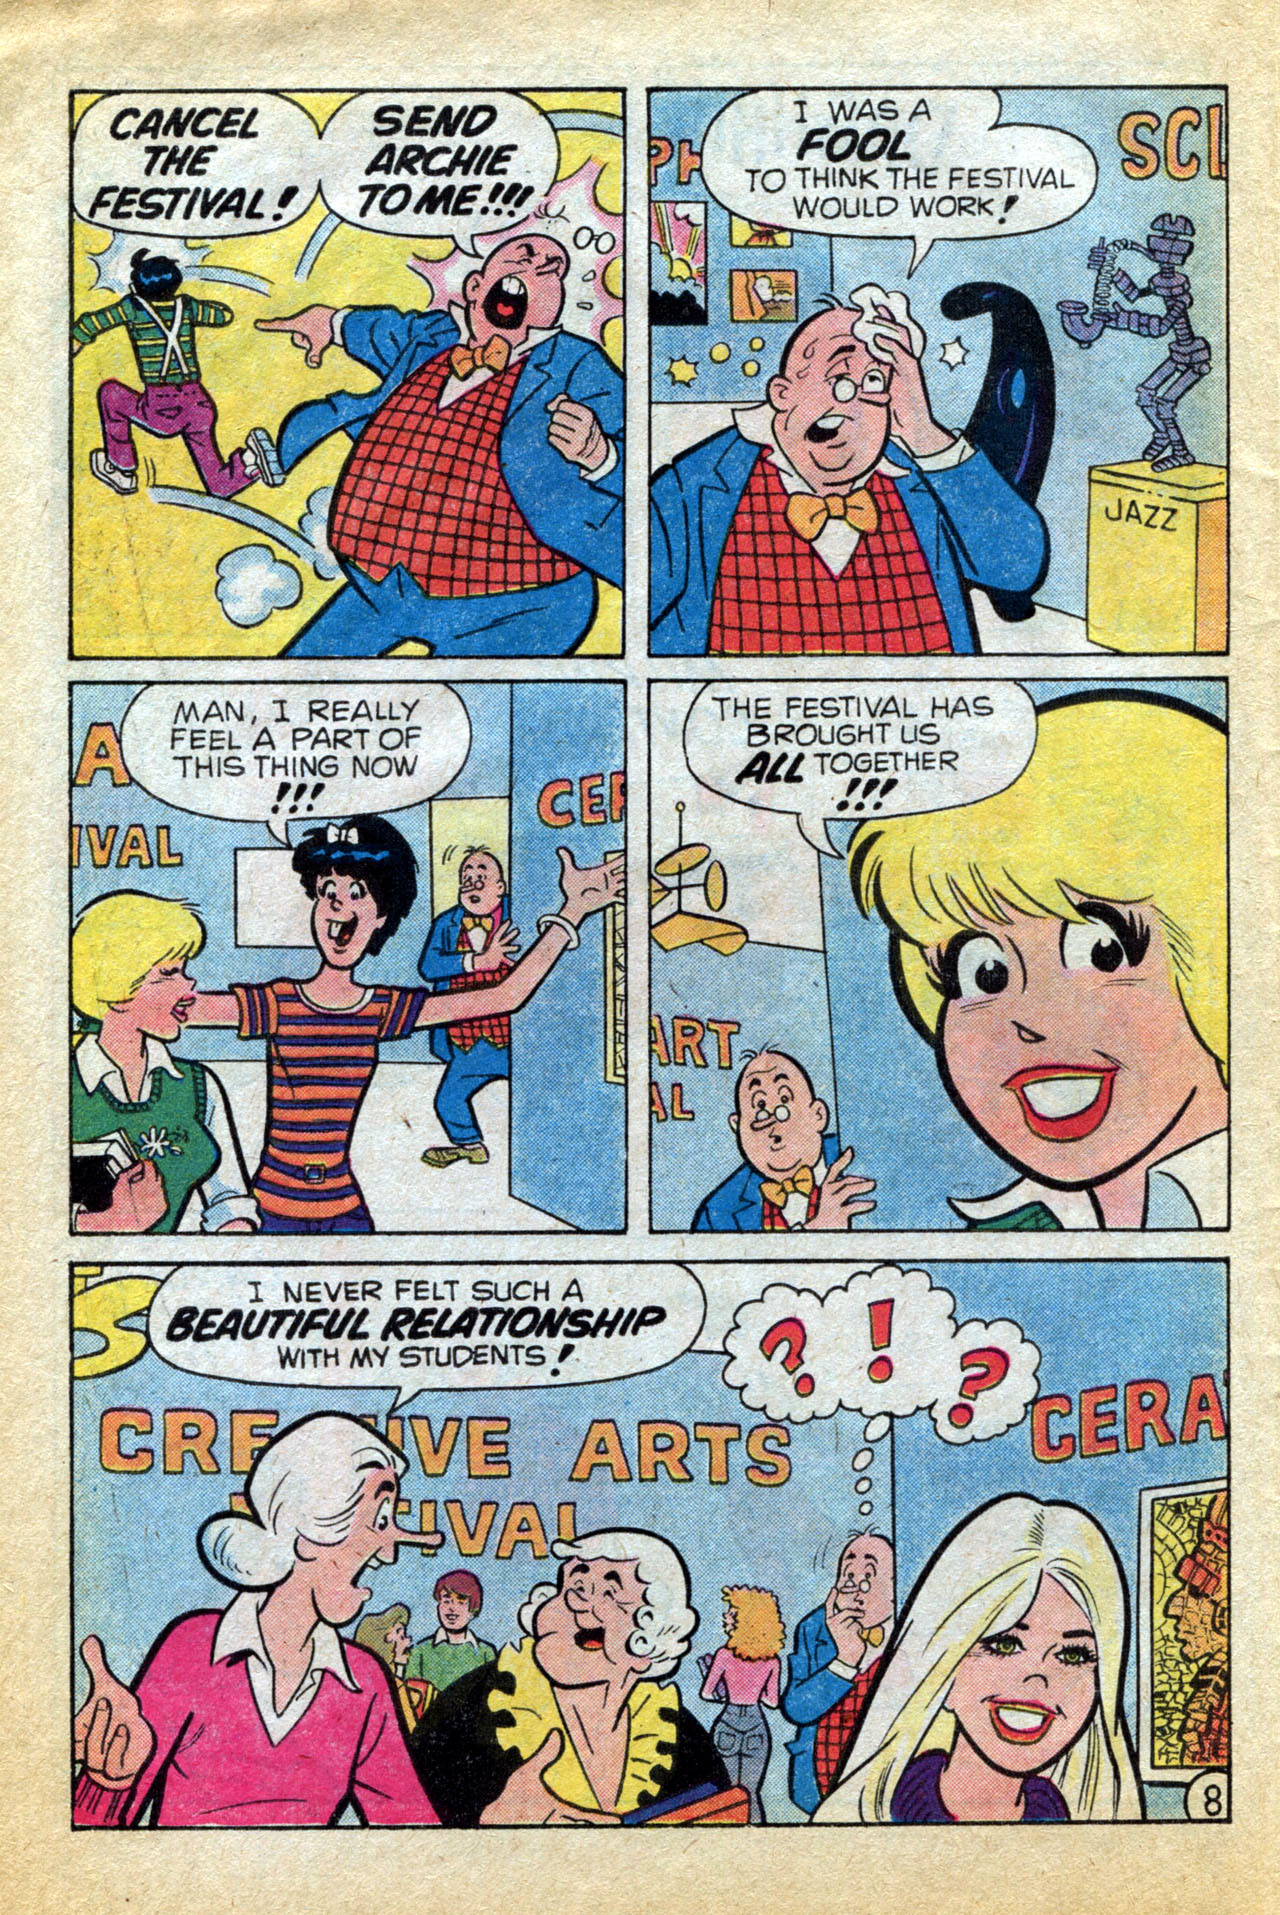 Read online Archie's Festival comic -  Issue # Full - 10